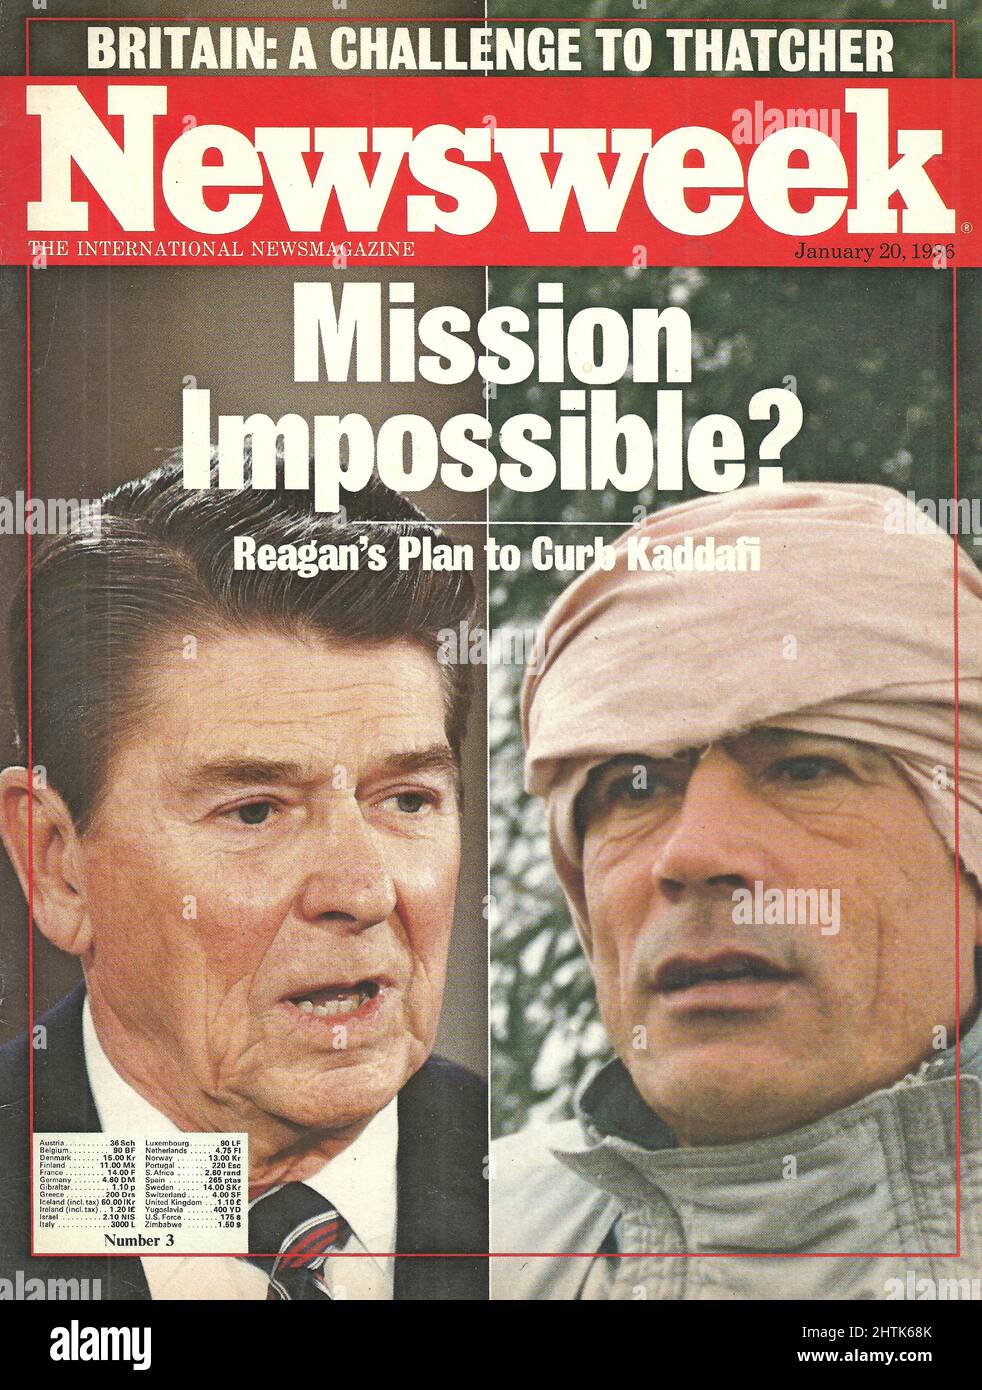 Newsweek cover January 20 1986 Reagan's Plan to Curb Kaddafi Britain: a challenge to Thatcher Stock Photo